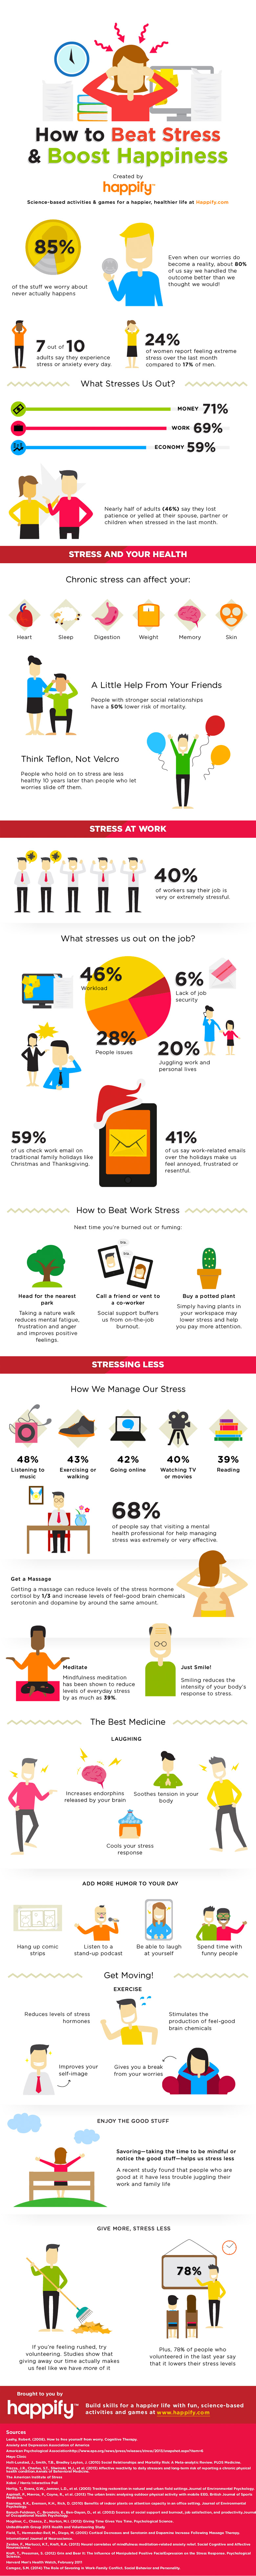 How to beat stress and boost happiness